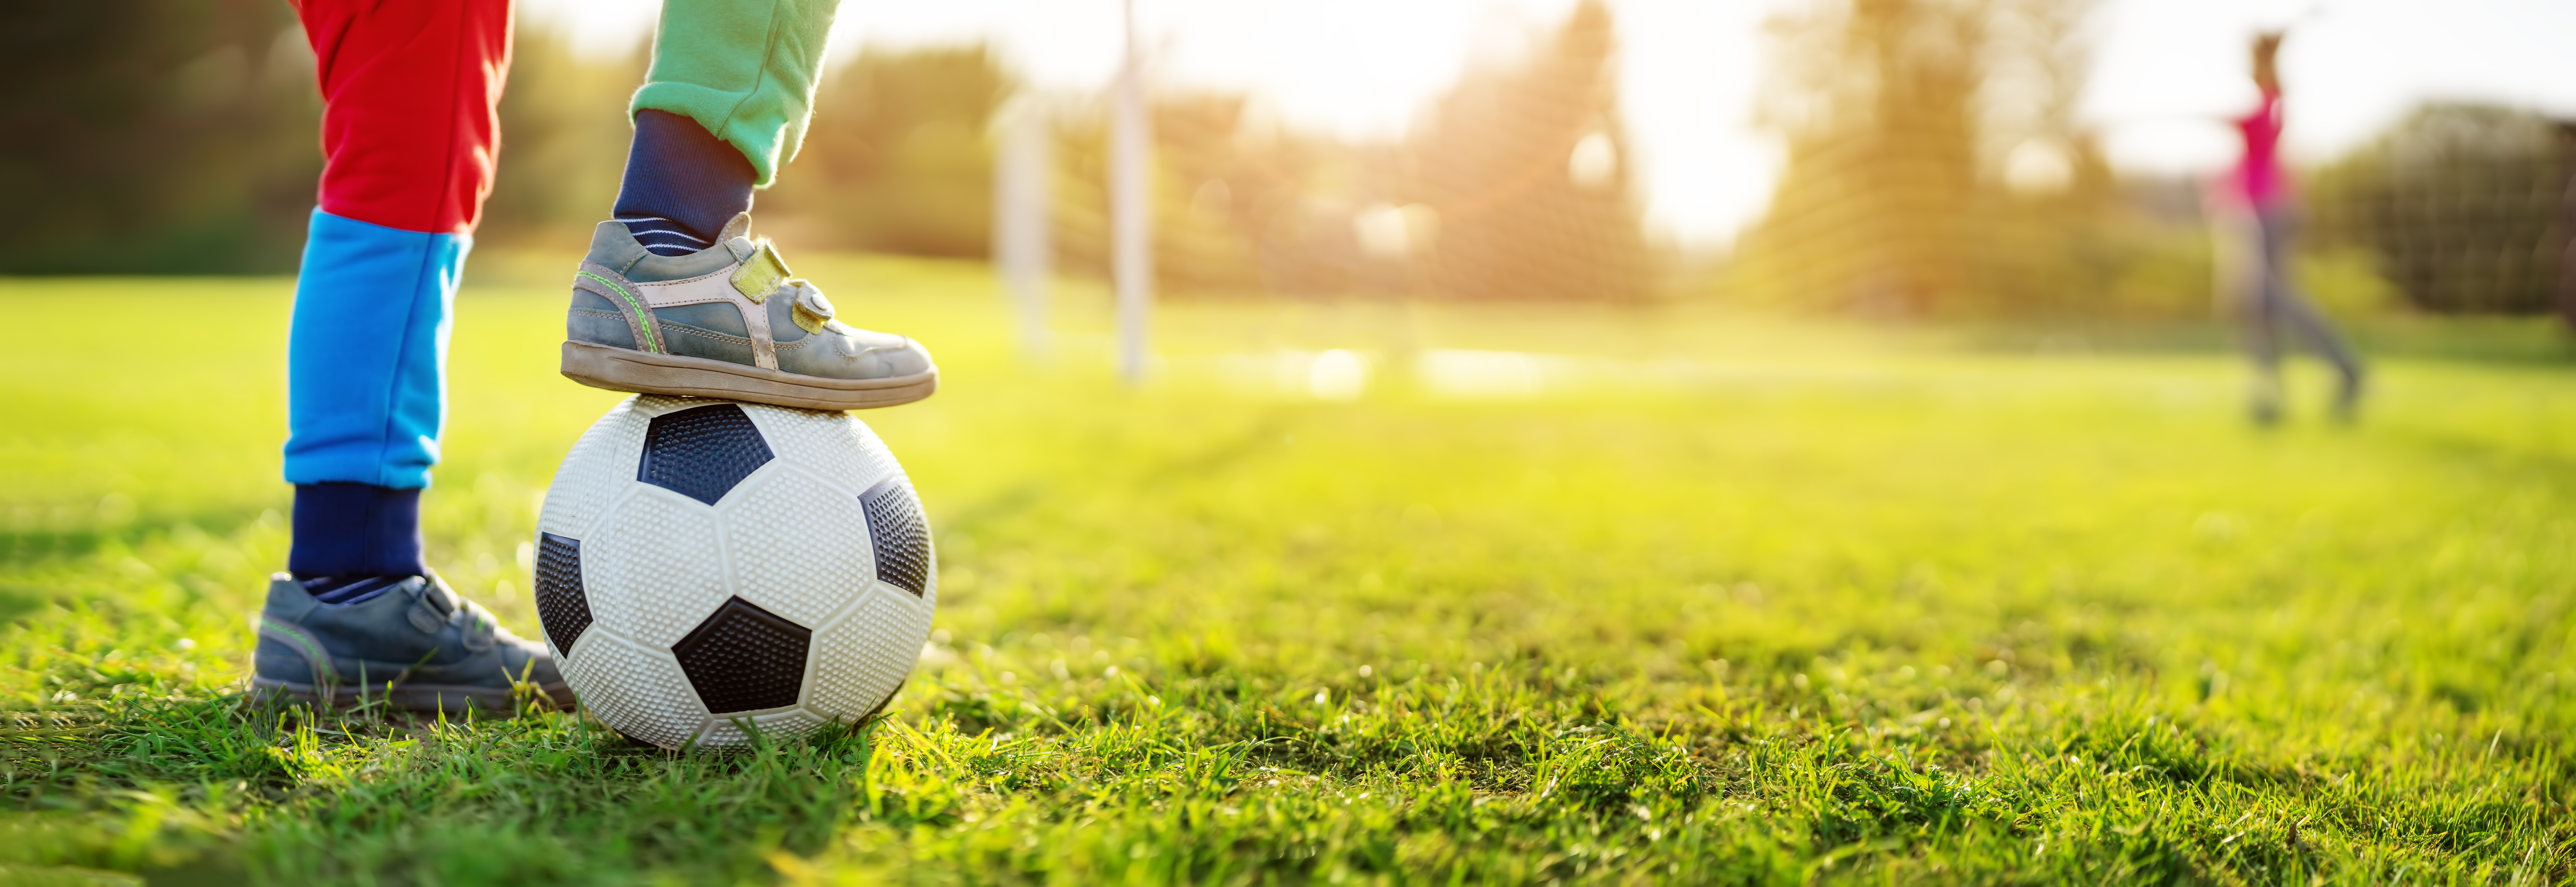 Child's foot on top of a soccer ball in a grass field.